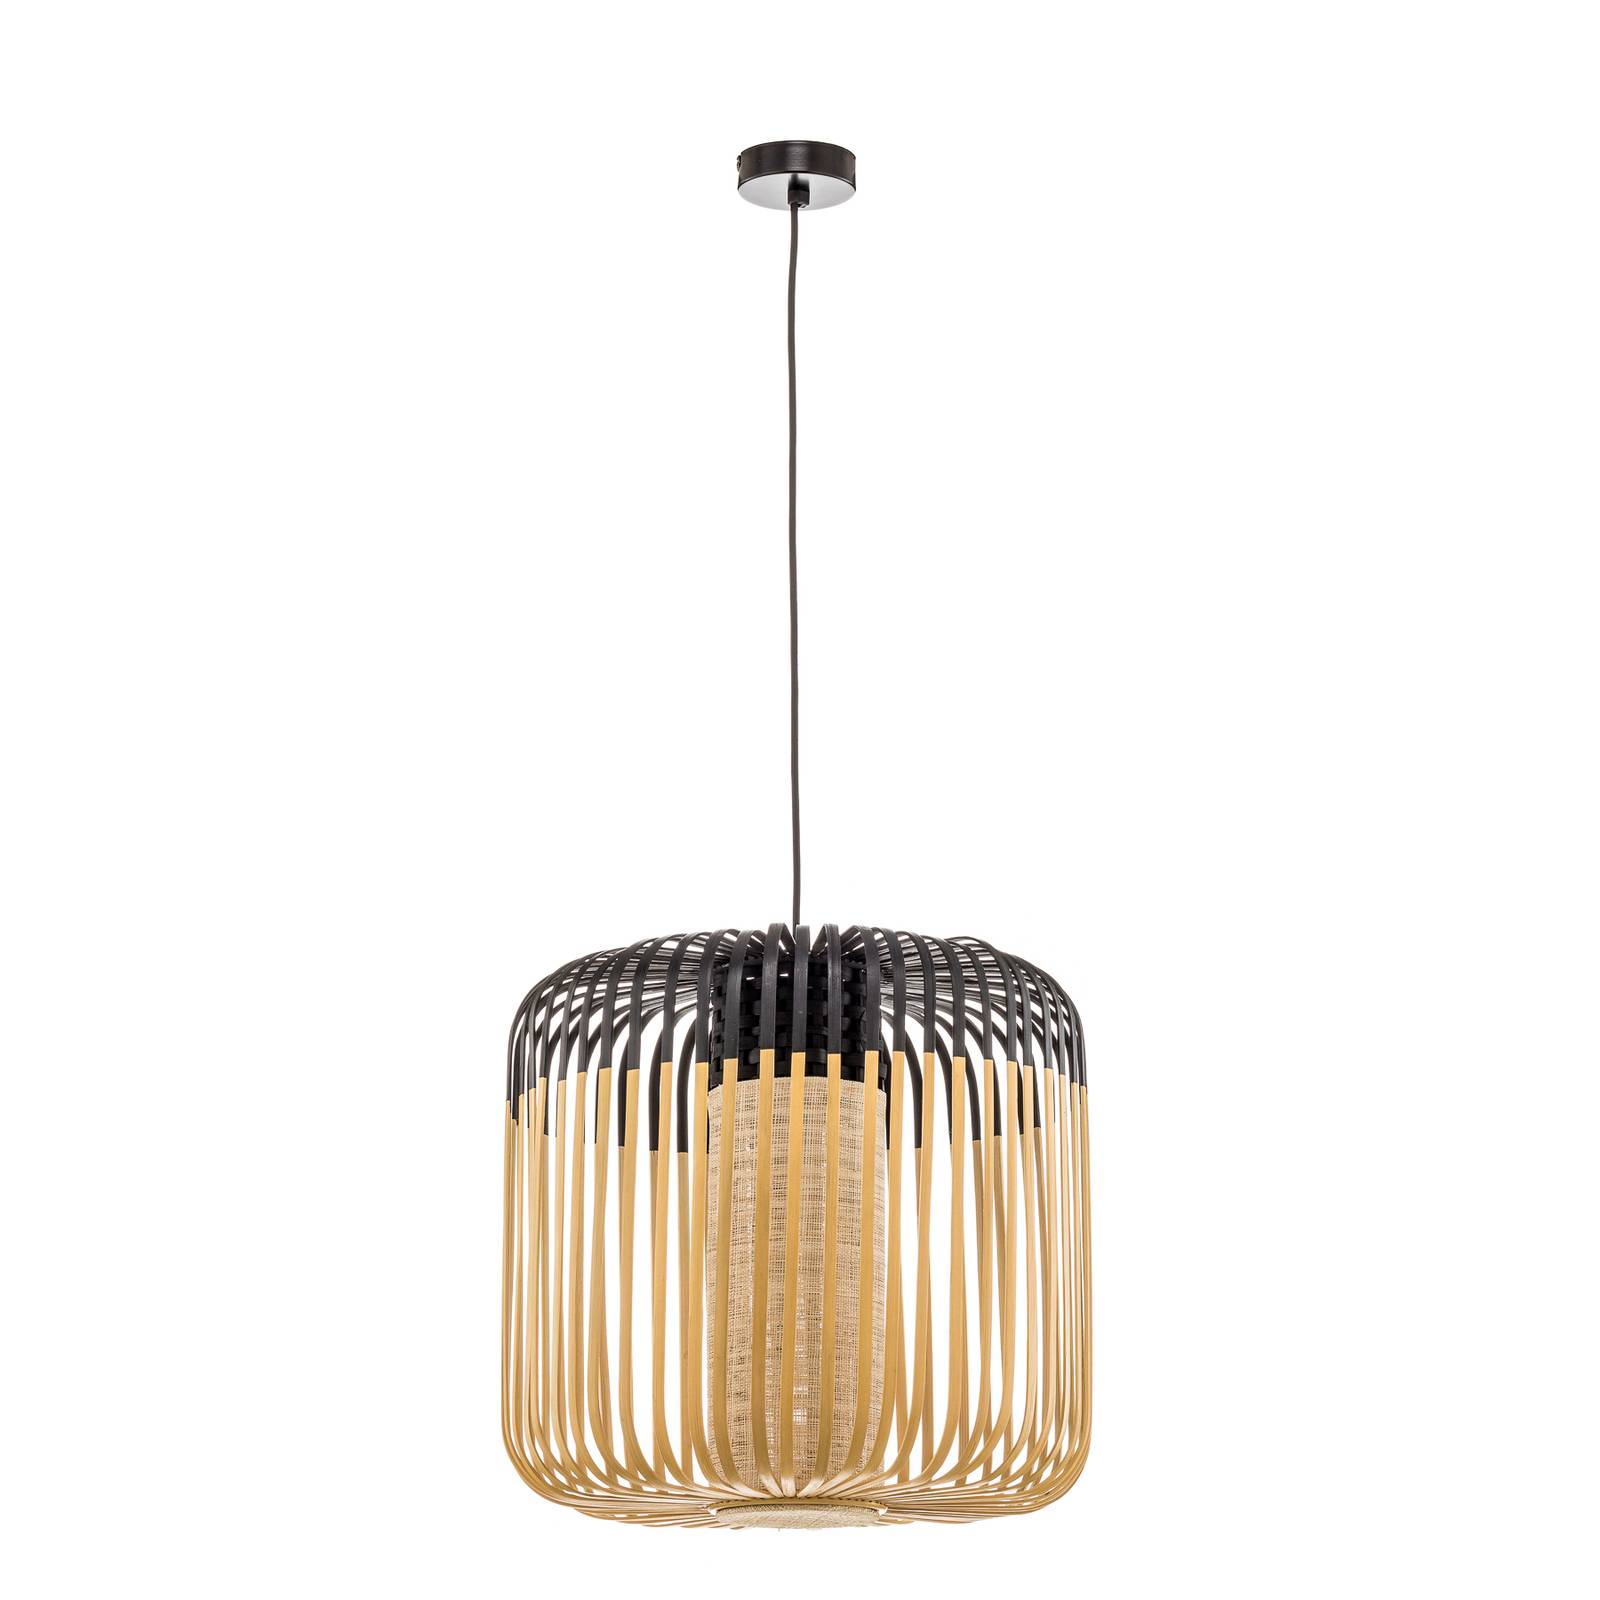 Image of Forestier Bamboo Light M suspension 45 cm noire 3700663909050